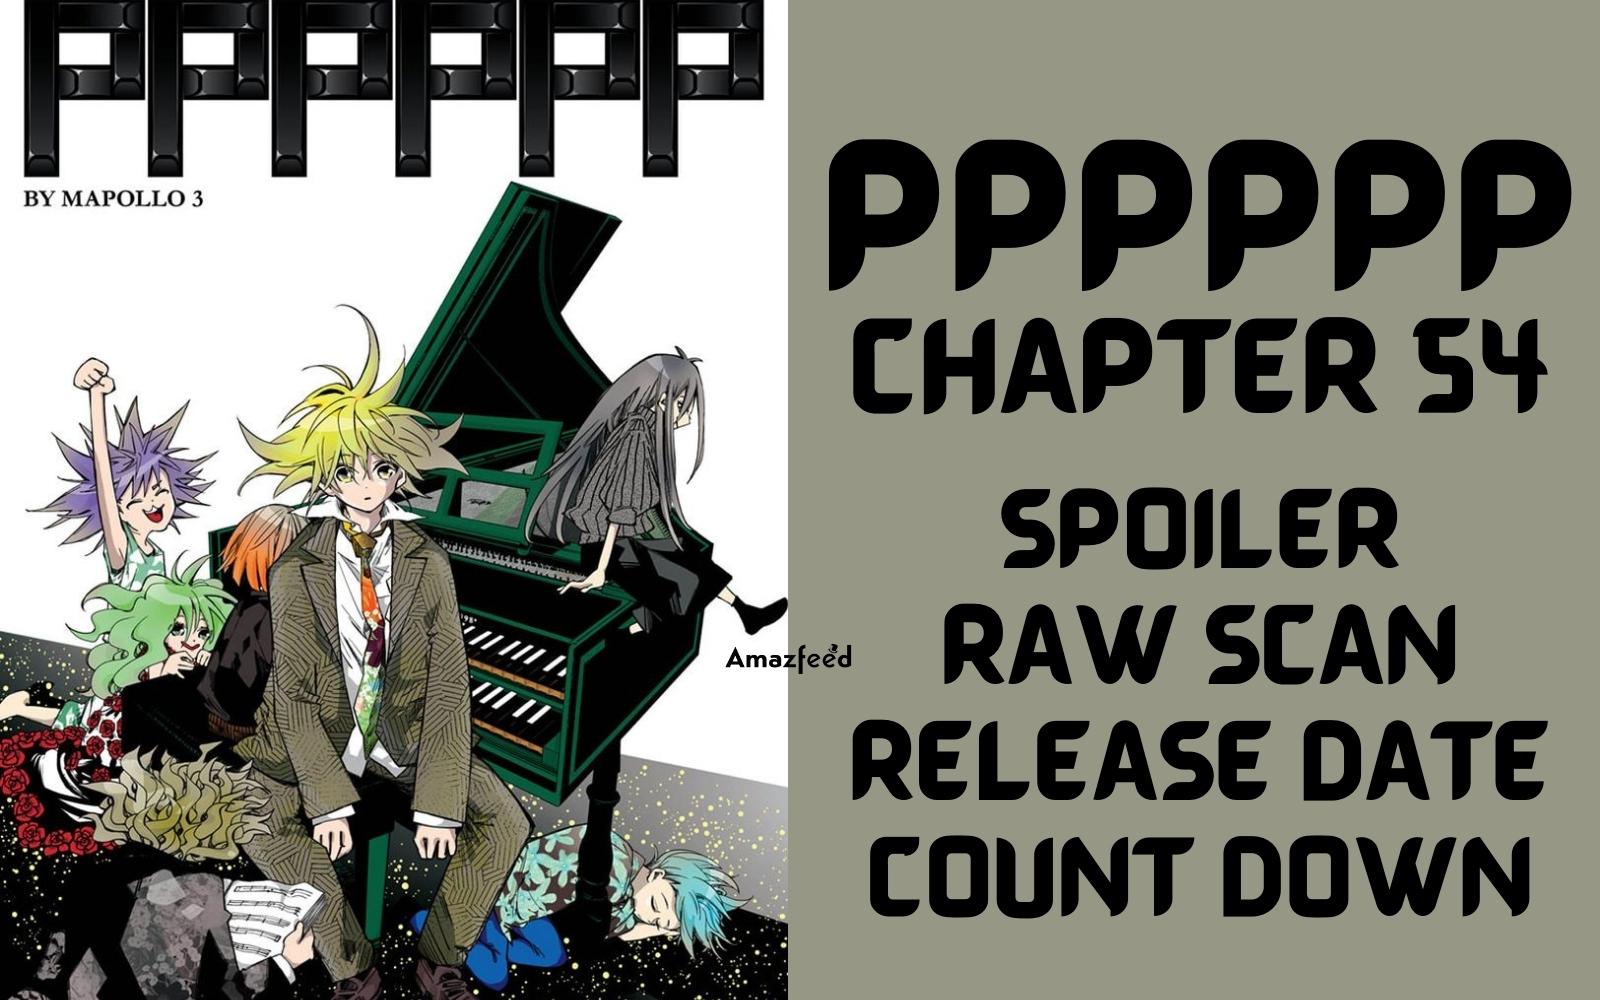 PPPPPP Chapter 54 Spoiler, Raw Scan, Color Page, Release Date & Everything You Want to Know